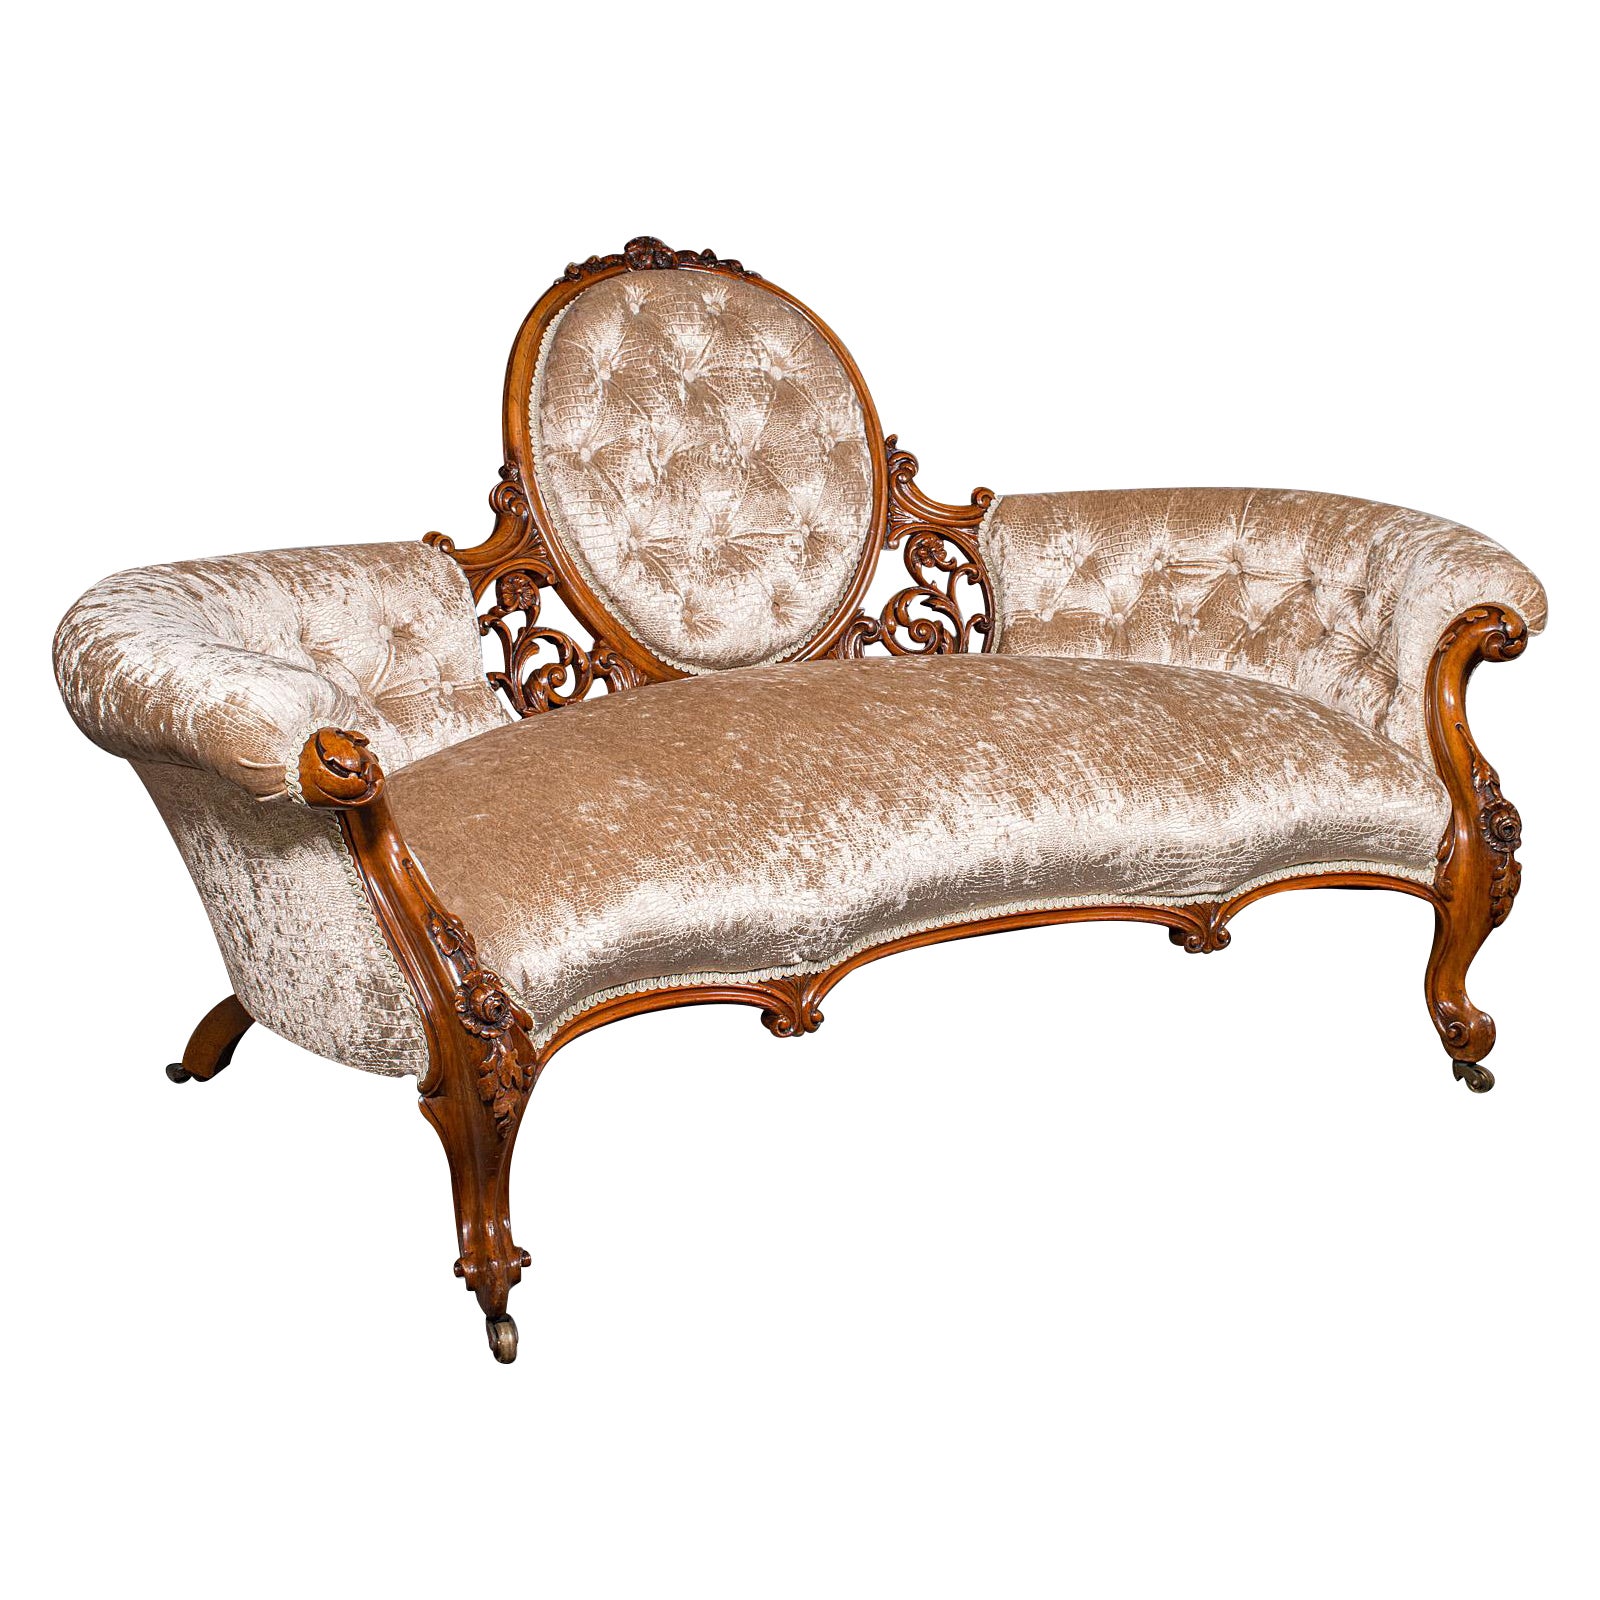 Antique Carved Spoon Back Settee, English, Walnut, Showpiece Sofa, Victorian For Sale